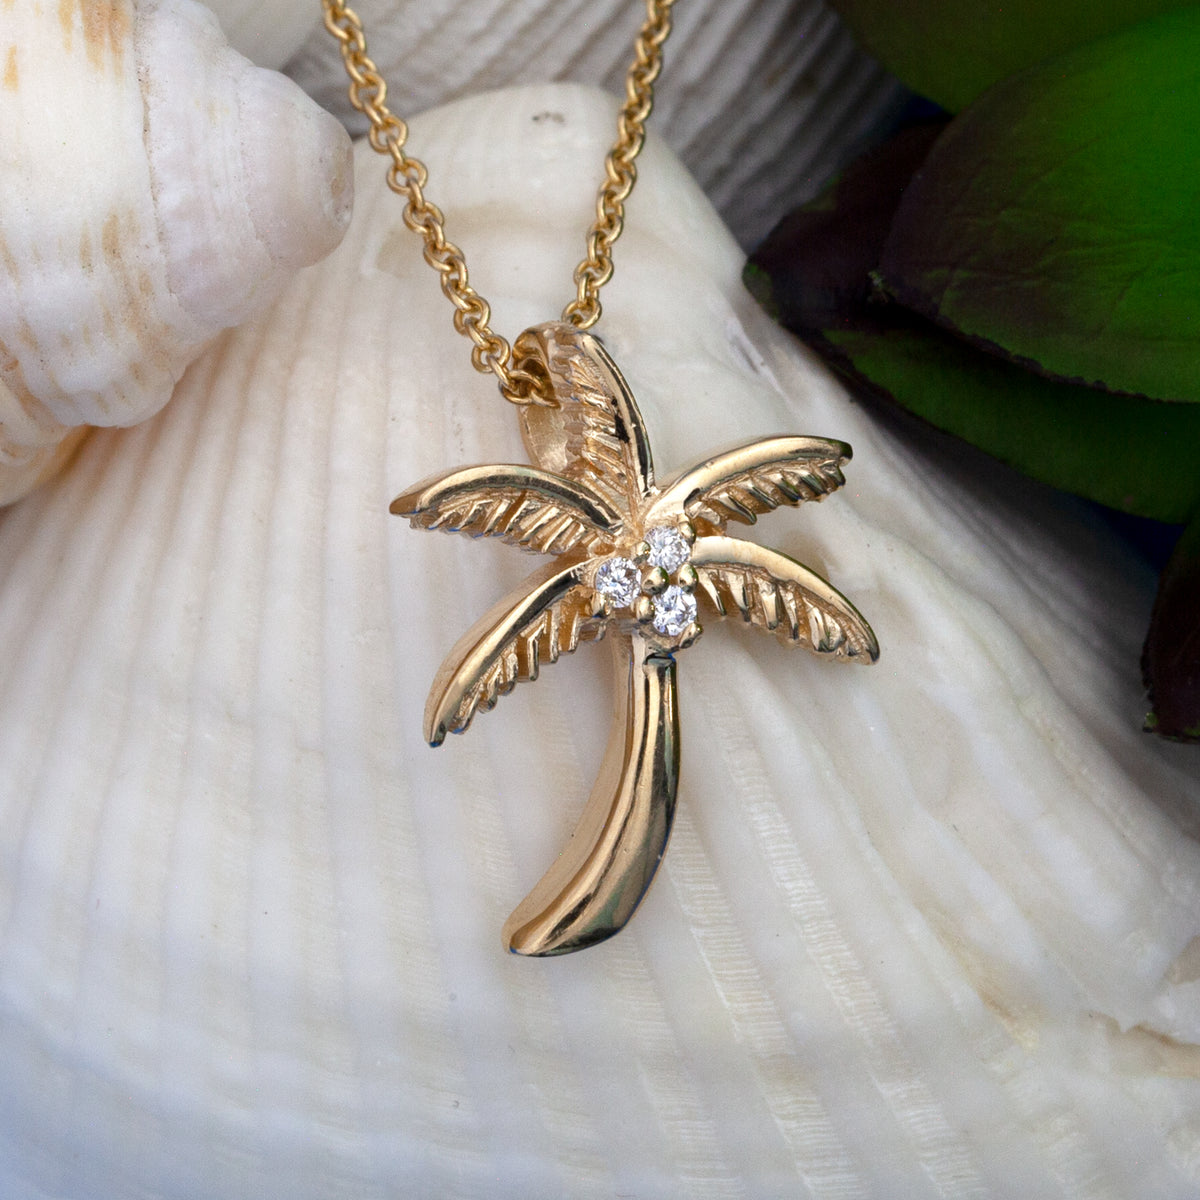 Palm Tree with Diamond Coconuts Pendant Necklace - 14K Gold and Diamonds -  Beach Jewelry